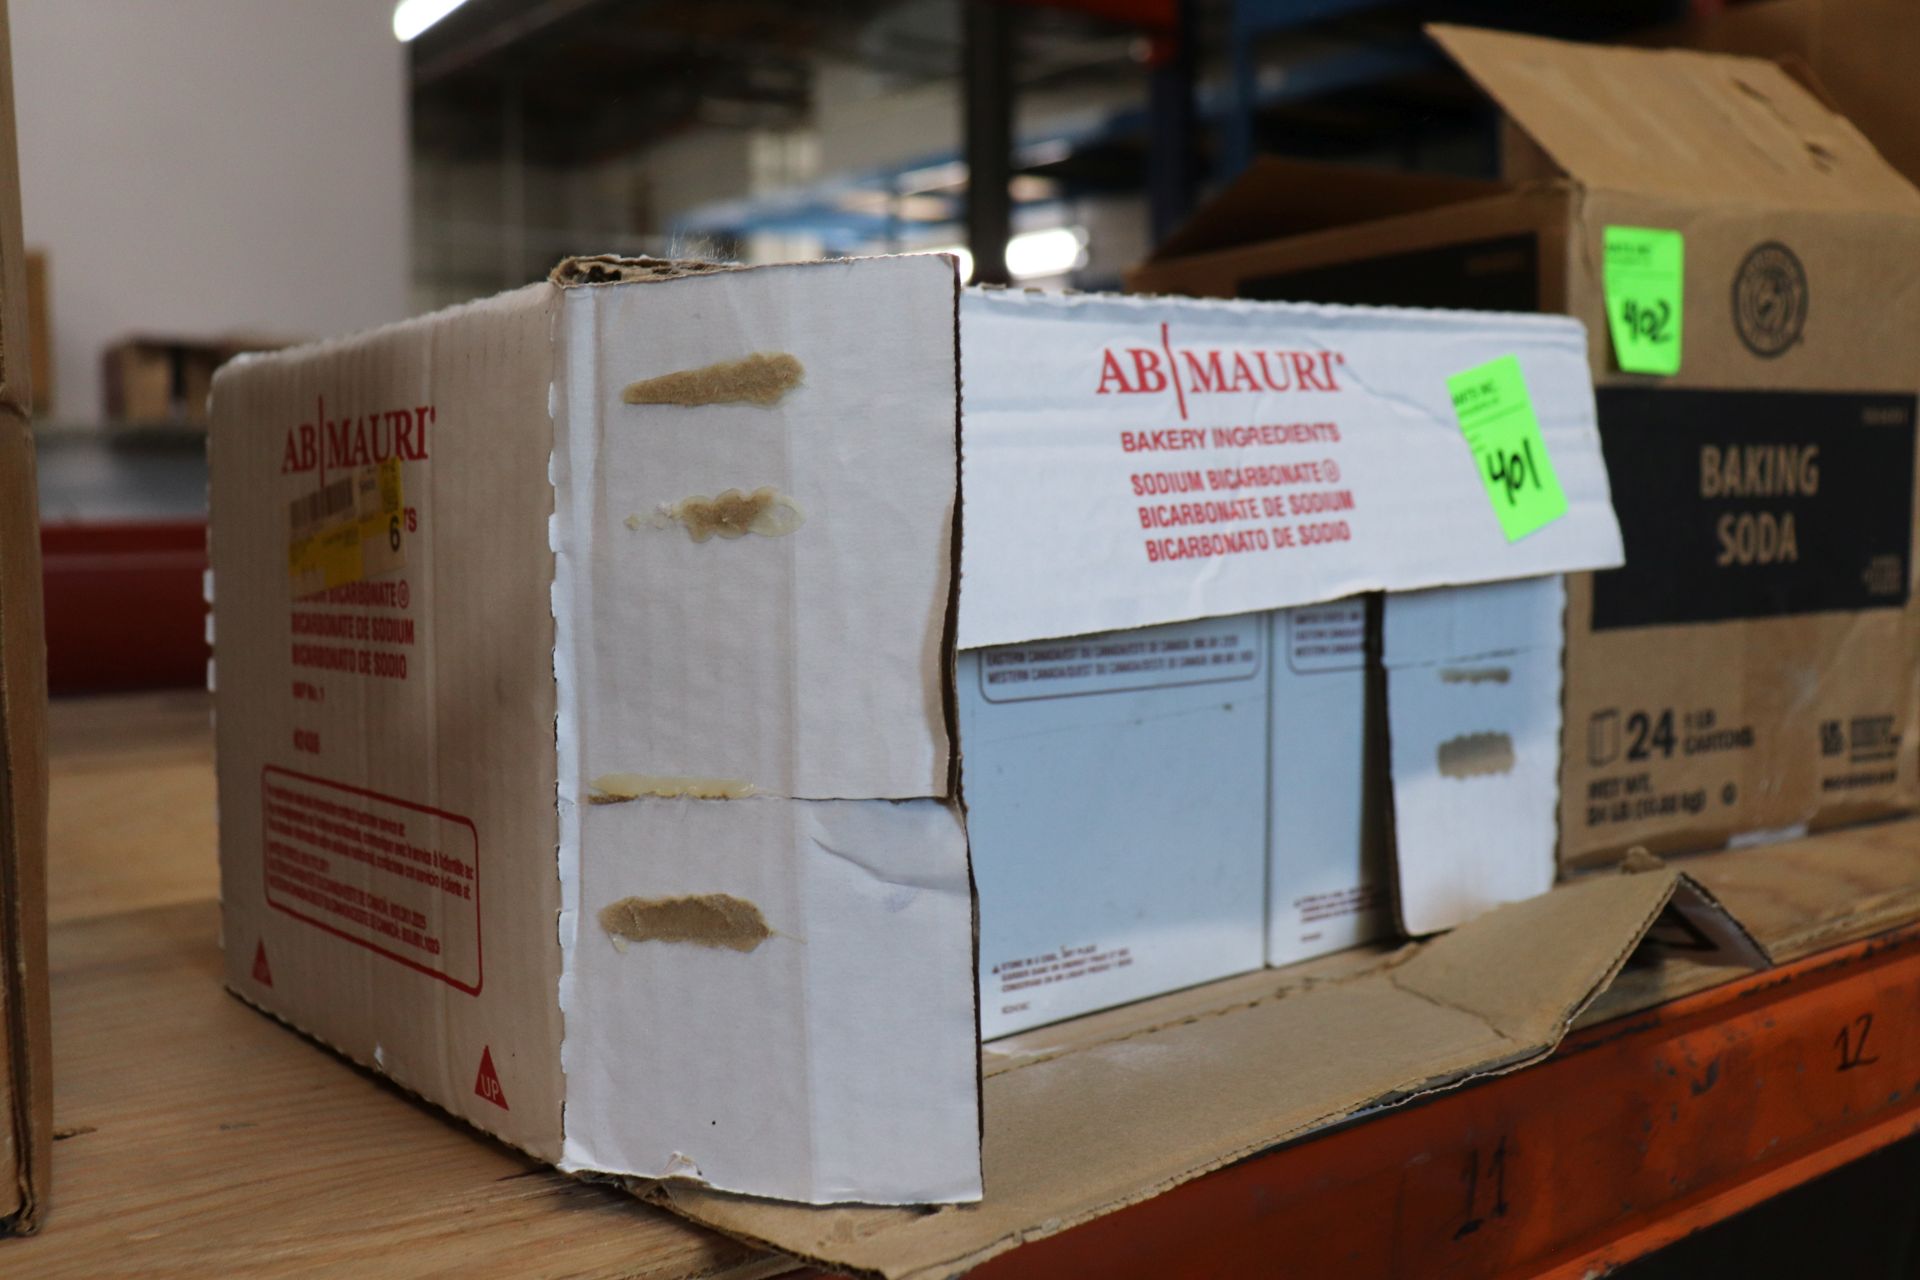 One case of baking soda containing twelve 2-lb boxes